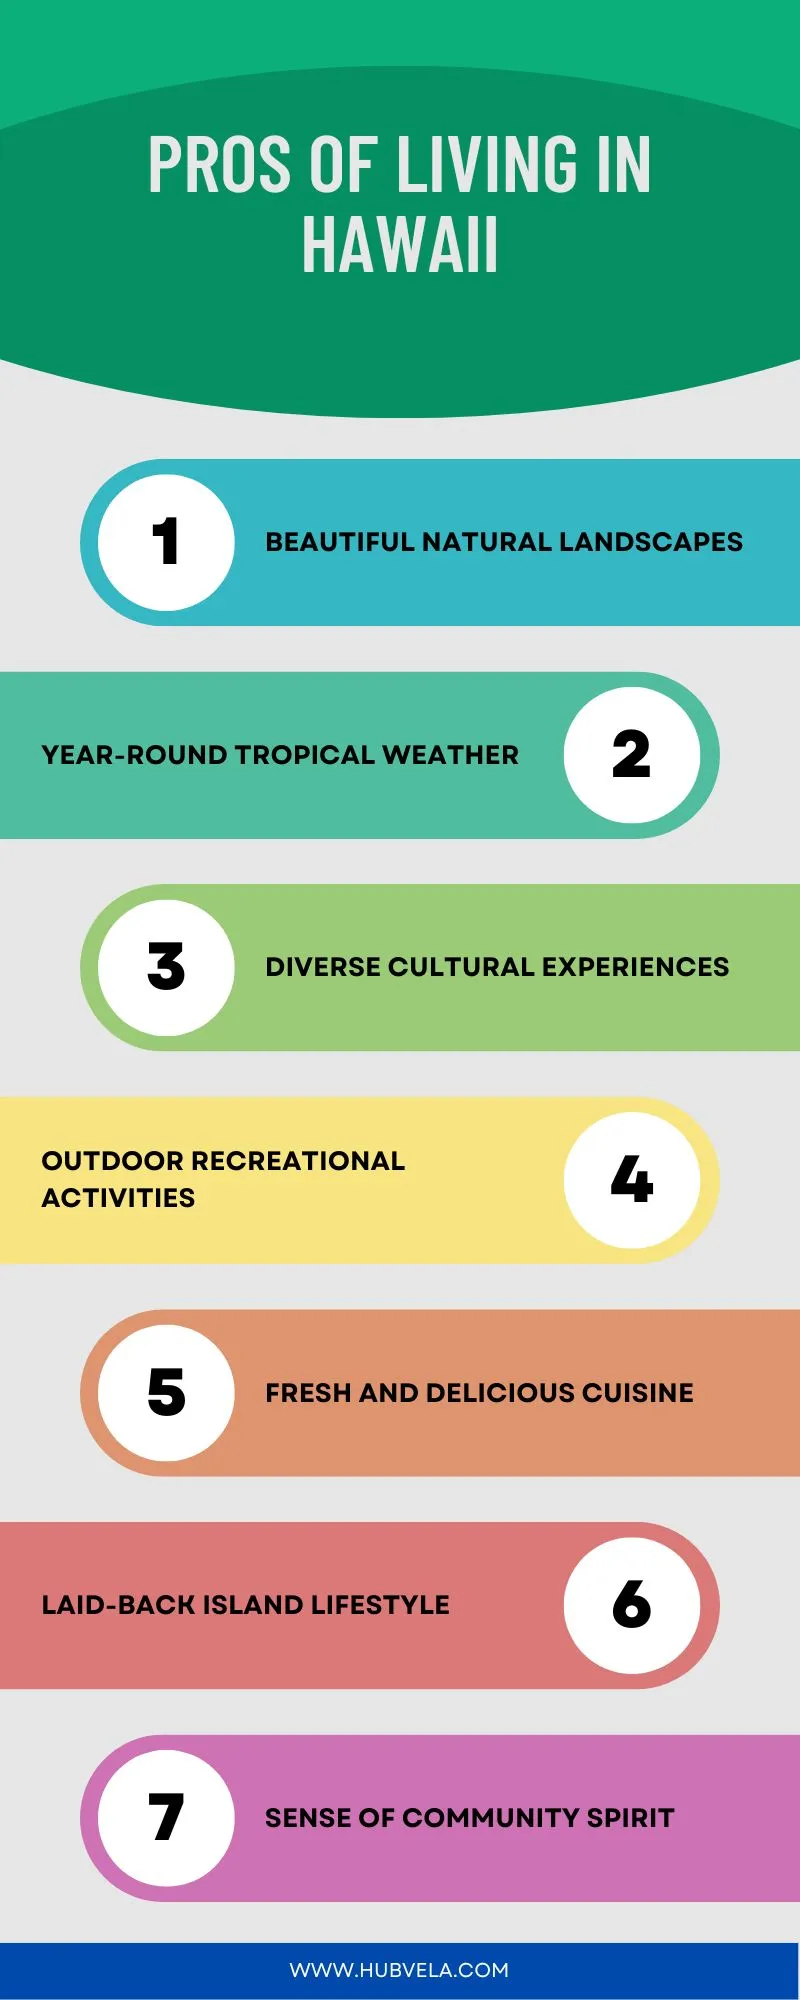 Pros of Living in Hawaii Infographic